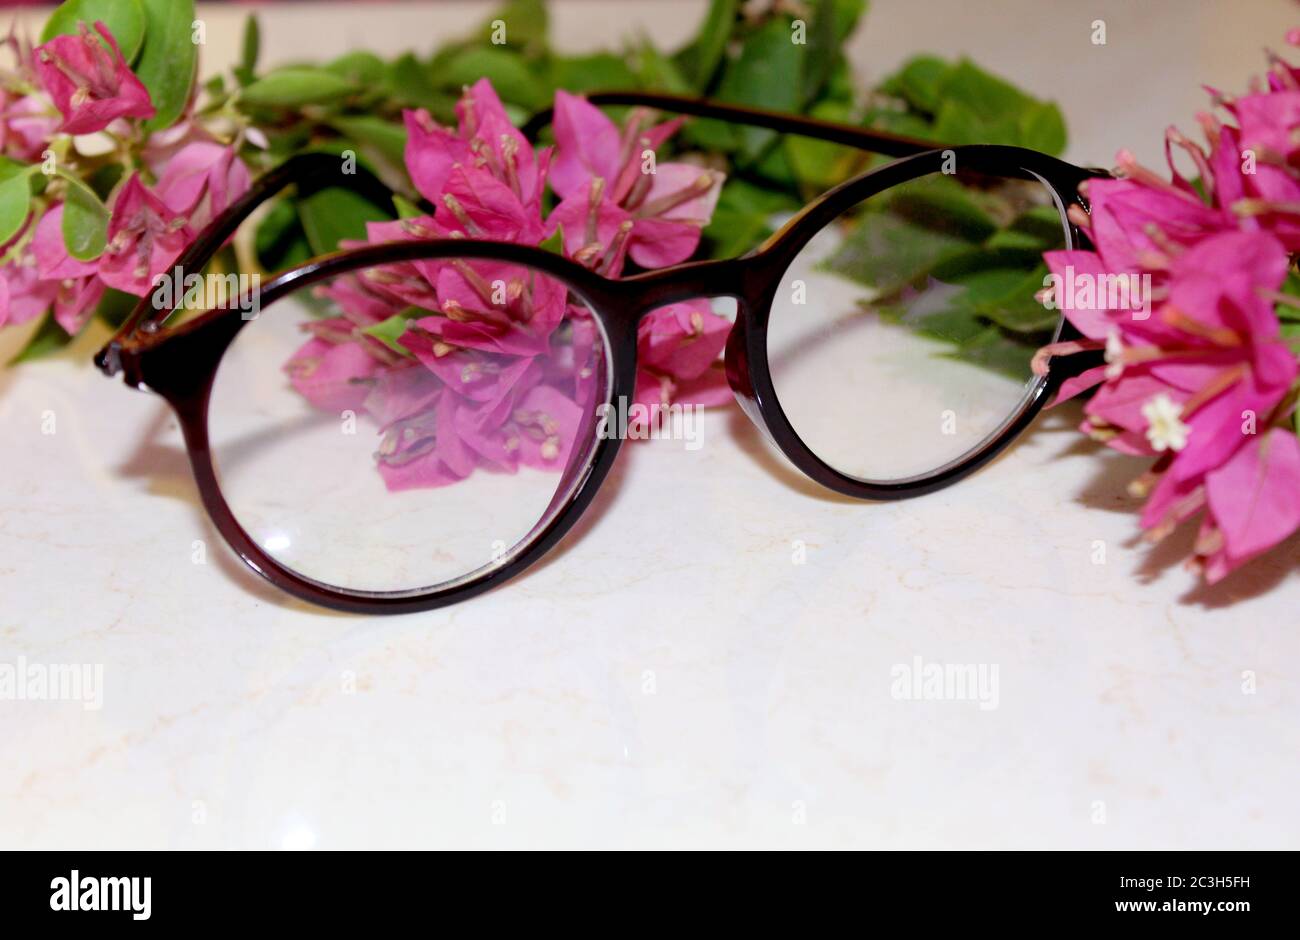 glasses on white table in front of pink bougainvillea flowers, creative background image with black text space. Stock Photo